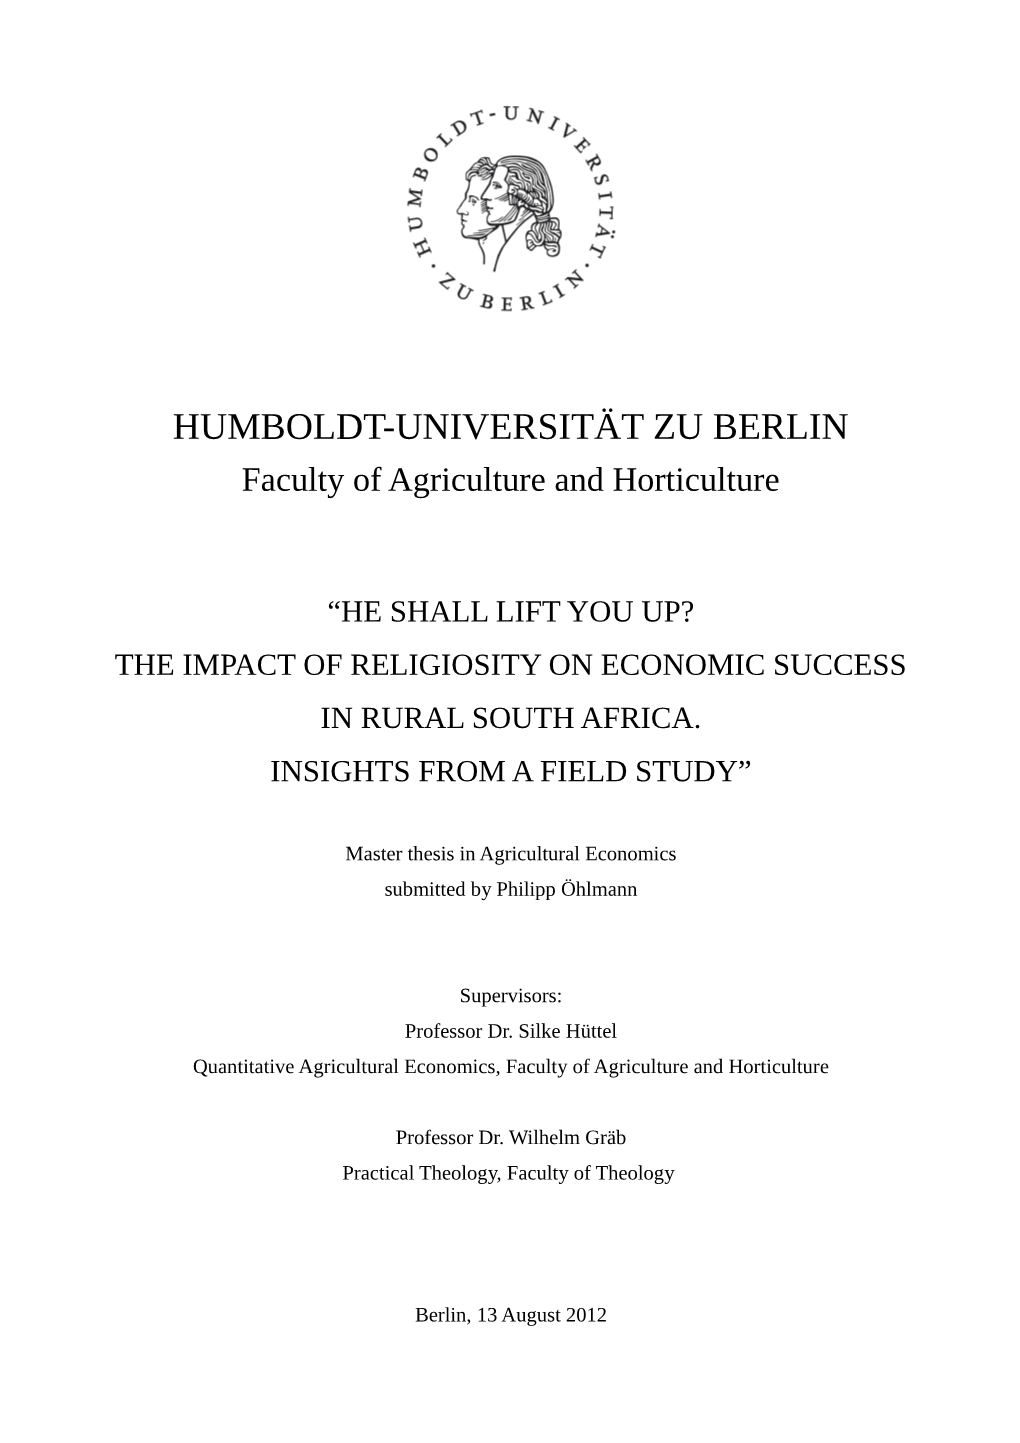 The Impact of Religiosity on Economic Success in Rural South Africa. Insights from a Field Study”